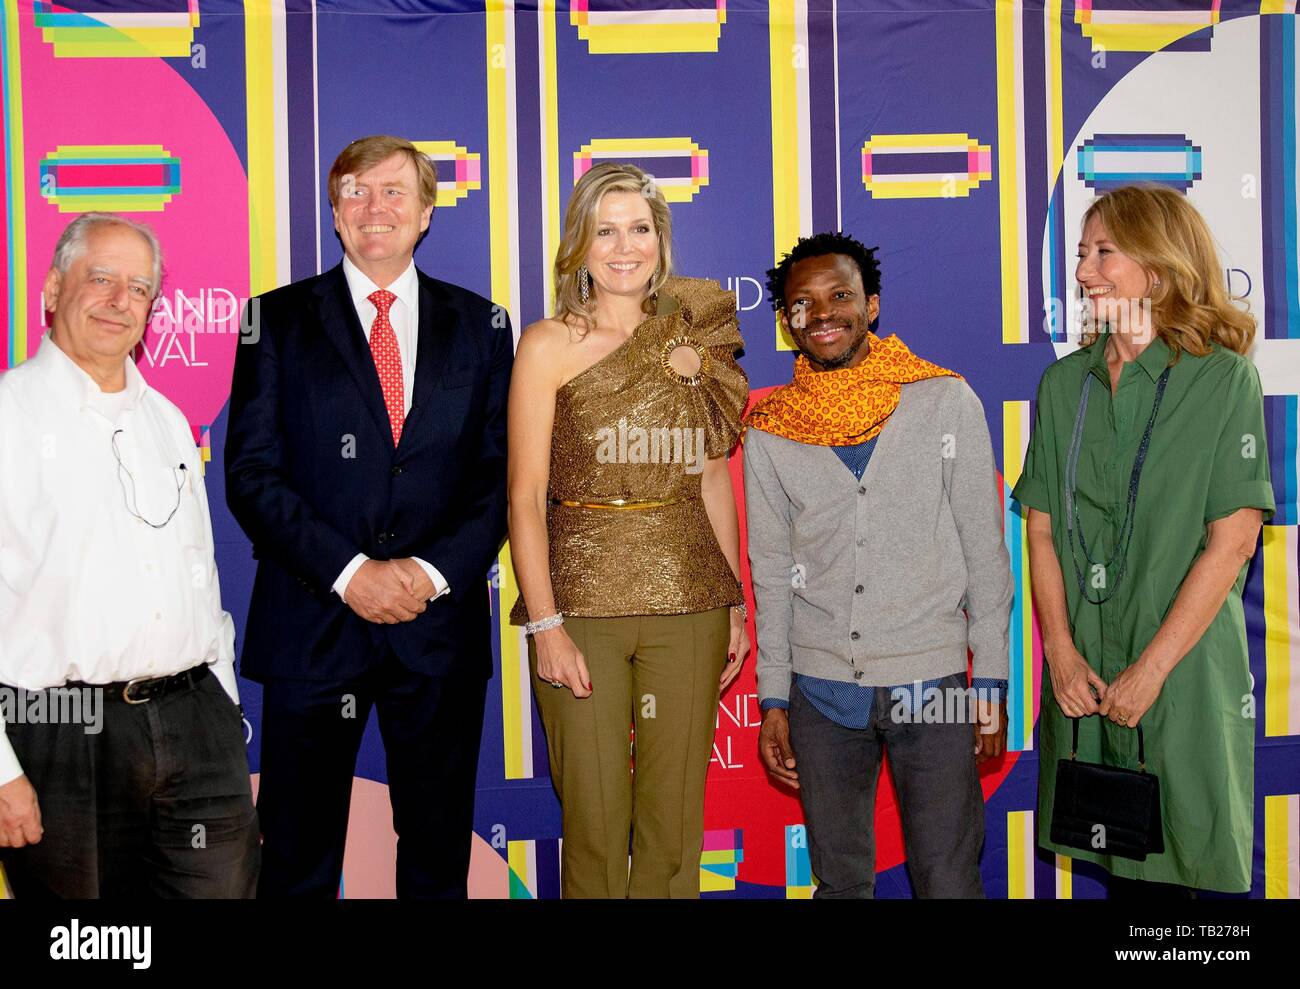 Amsterdam, Netherlands. 29th May, 2019. William Kentridge, King Willem-Alexander and Queen Maxima of The Netherlands, Faustin Linyekula en director of the Holland Festival Annet Lekkerkerker at the Theater Amsterdam in Amsterdam, on May 29, 2019, to attend the opening performance of the 72nd Holland Festival, music theater performance The Head & The Load by South African artist William Kentridge Credit: Albert Nieboer/Netherlands OUT/Point De Vue OUT |/dpa/Alamy Live News Stock Photo